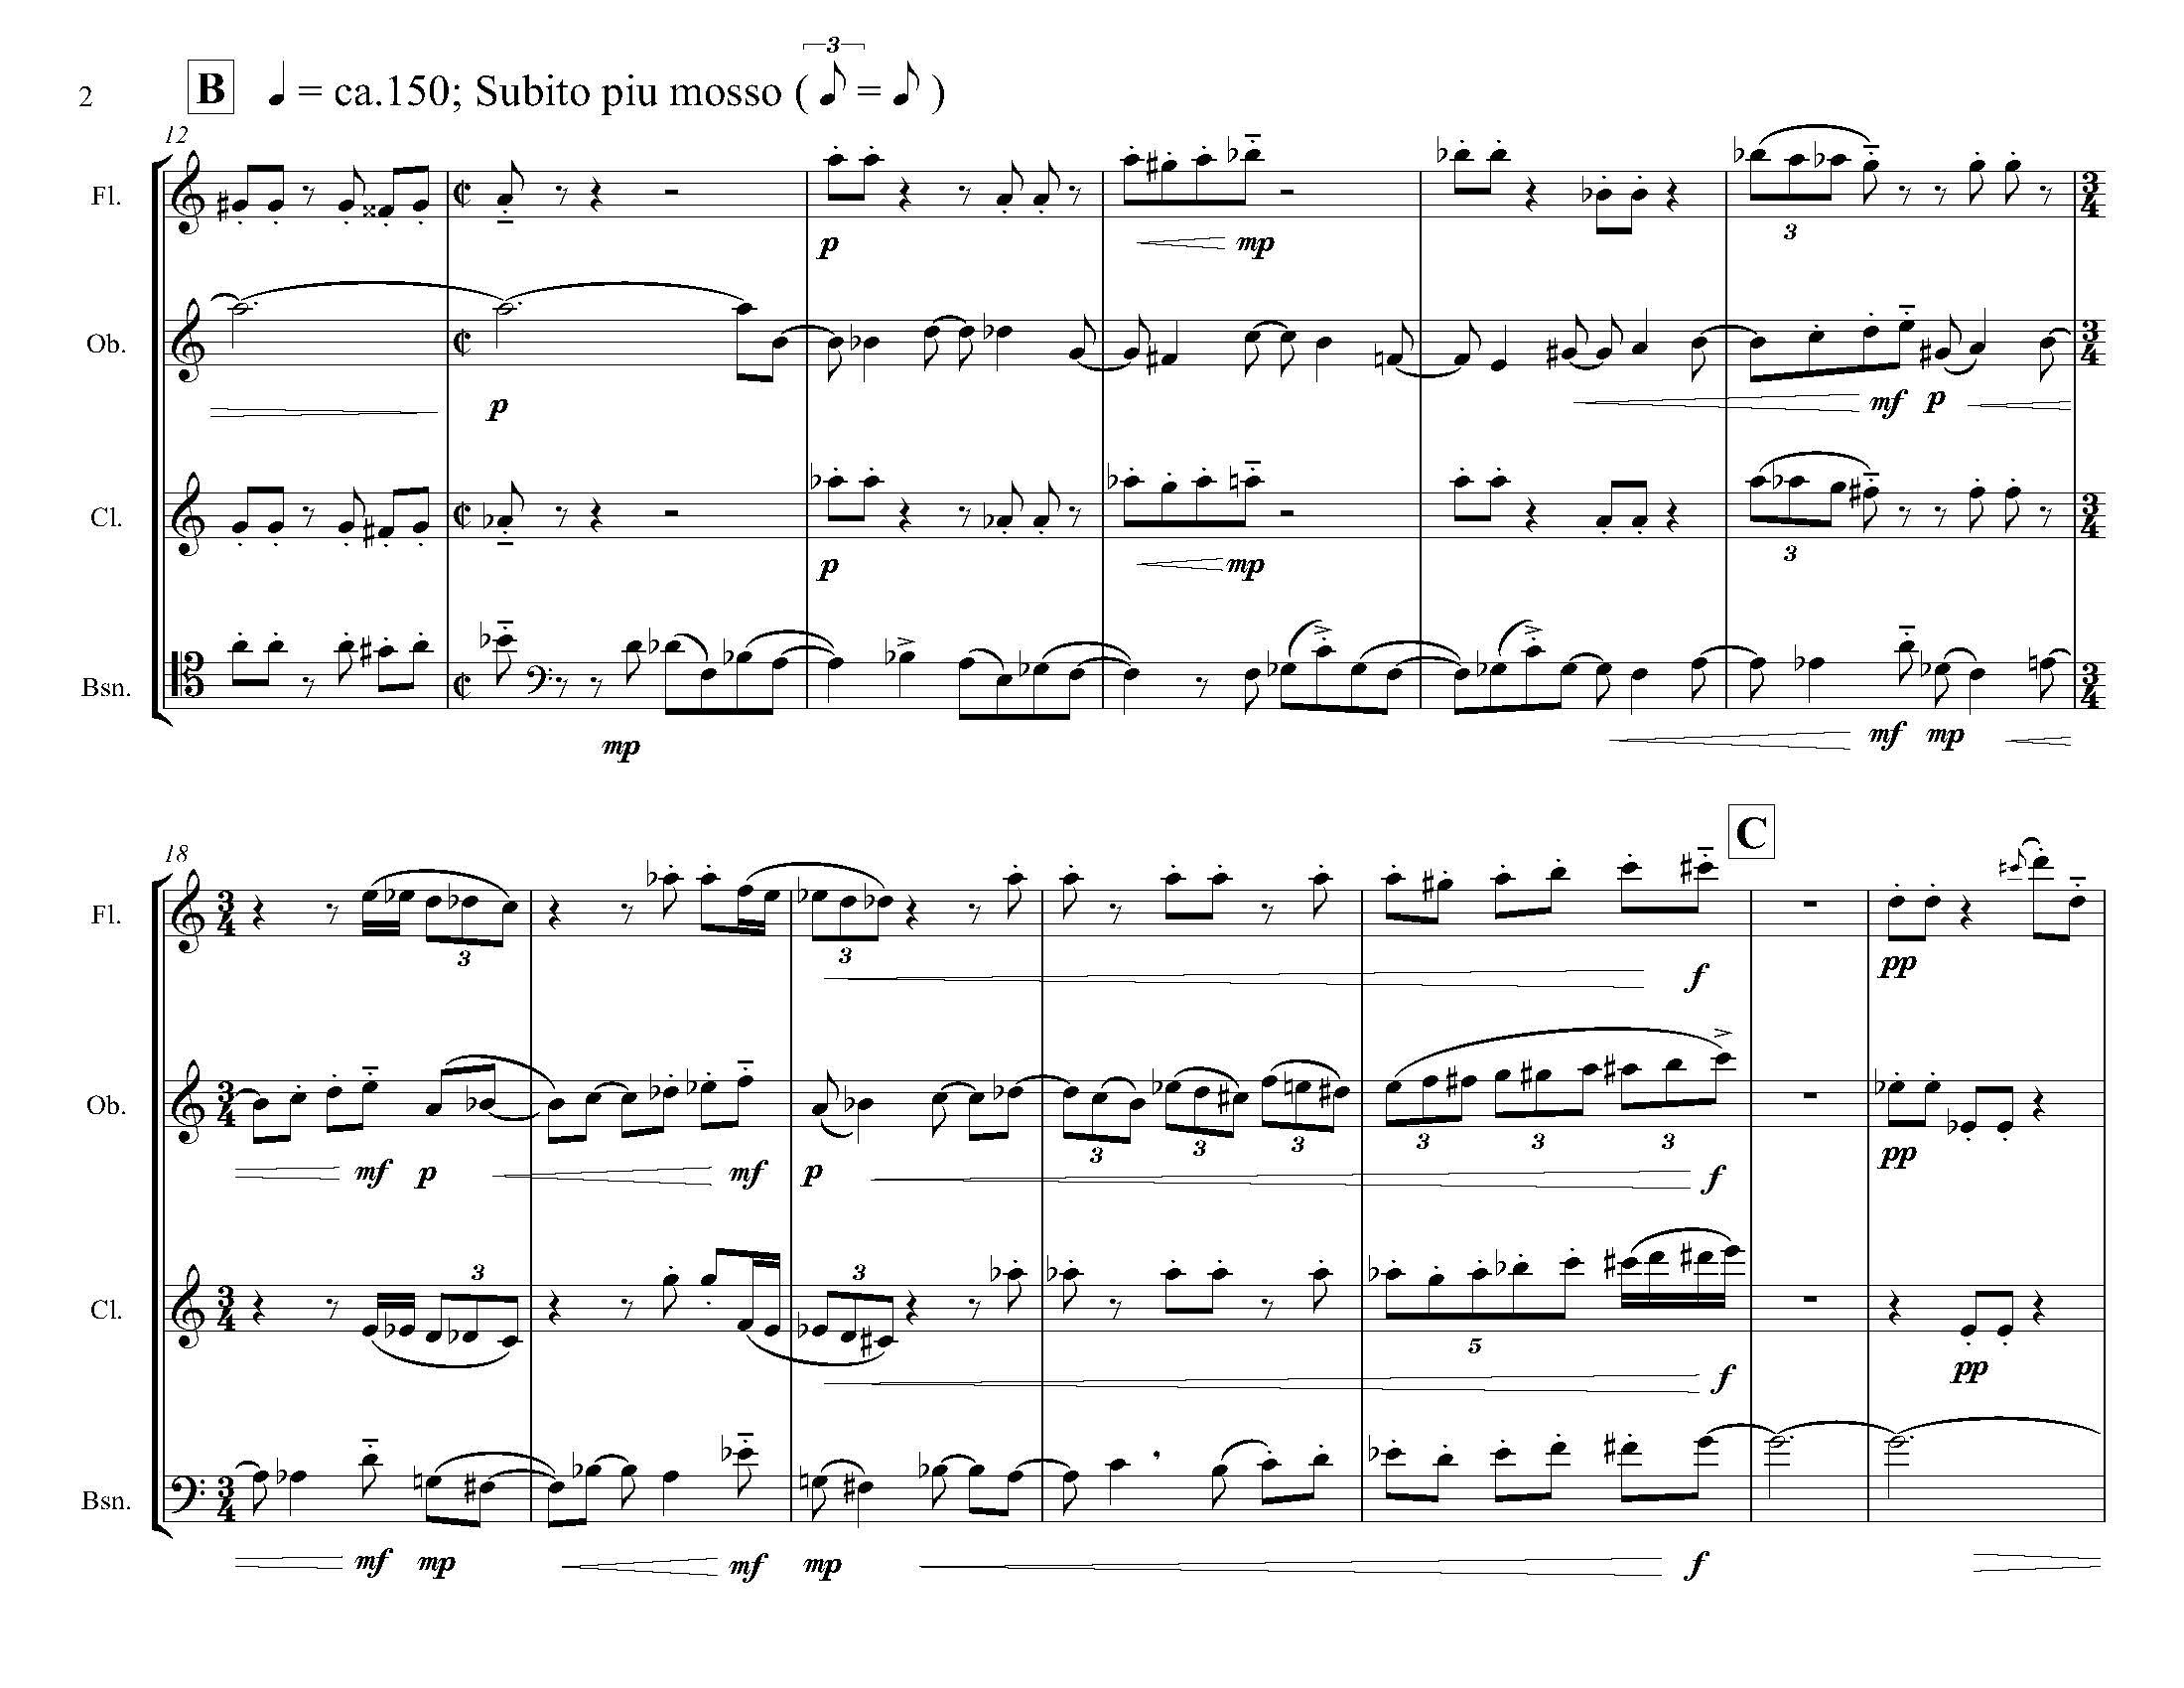 March the Twenty-Fifth - Complete Score_Page_08.jpg